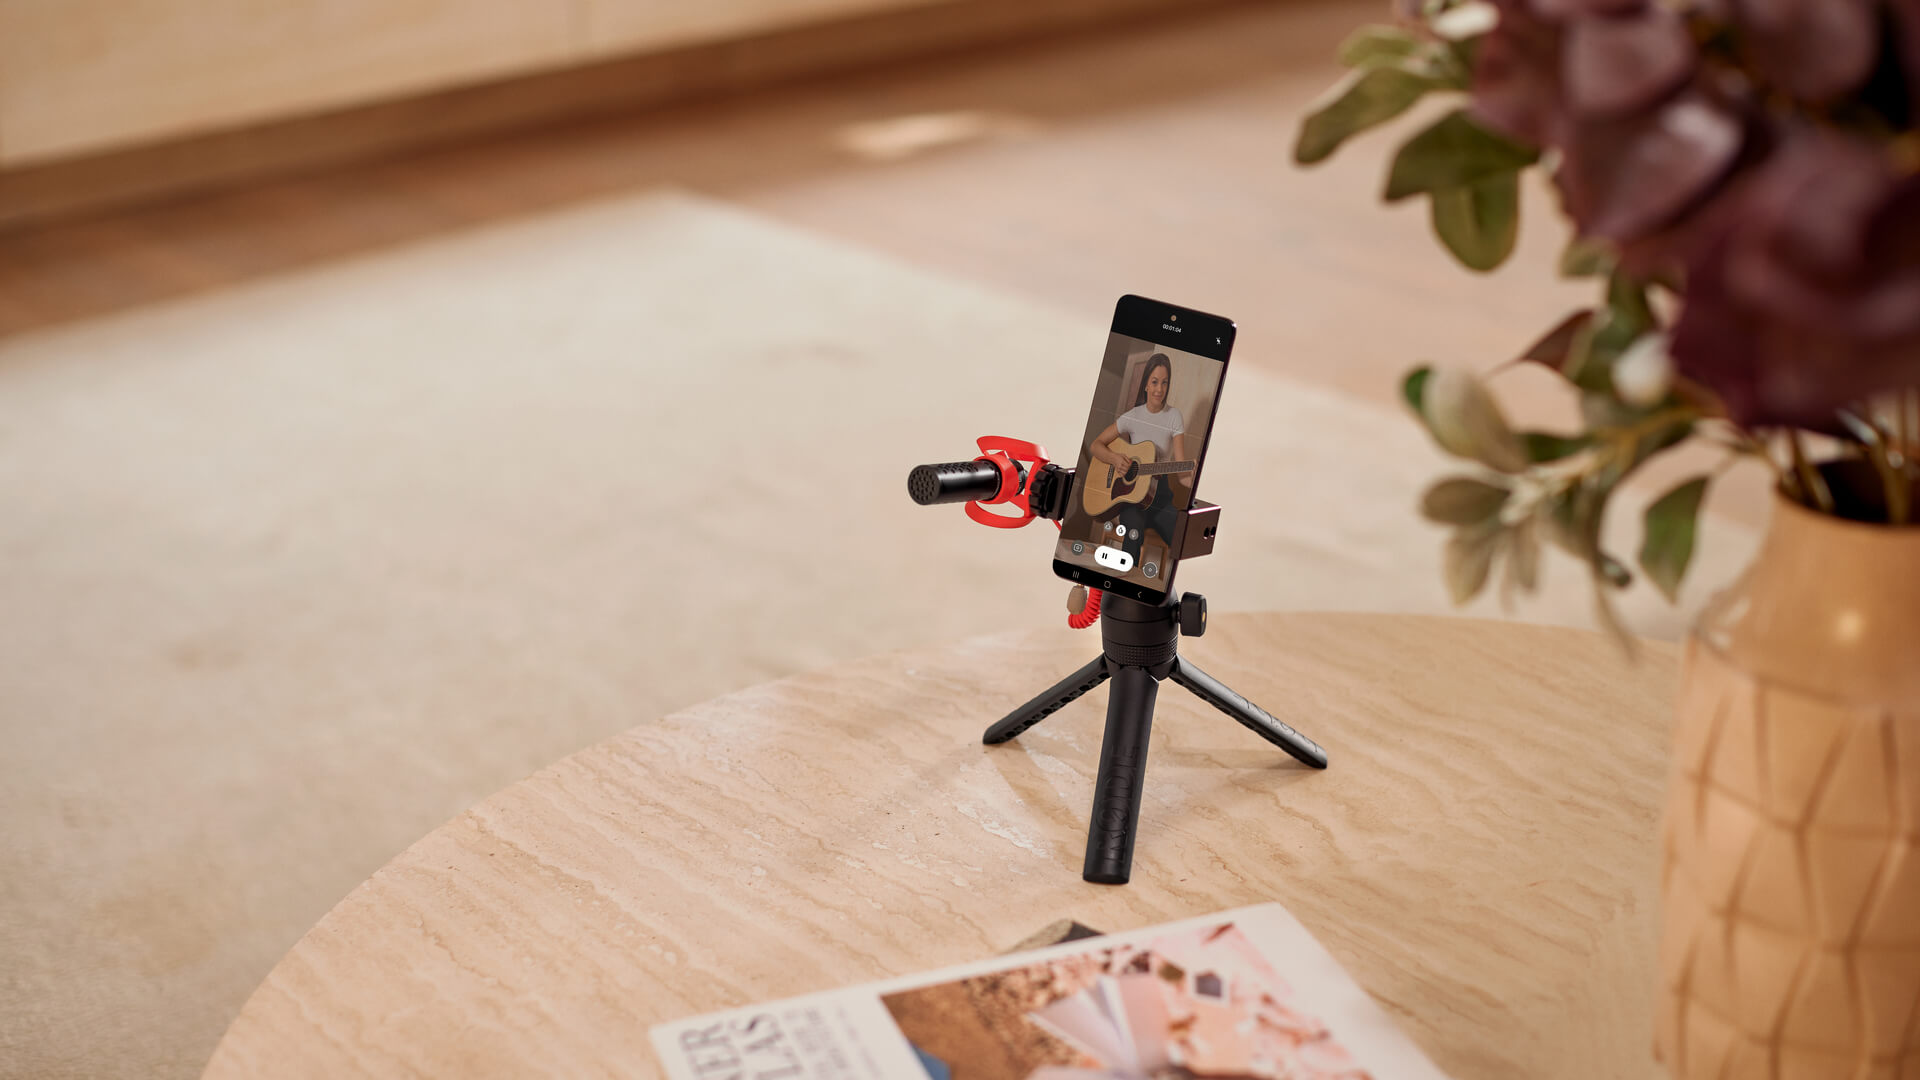 Mobile phone with VideoMicro II connected and mounted to Tripod 2 on wooden table